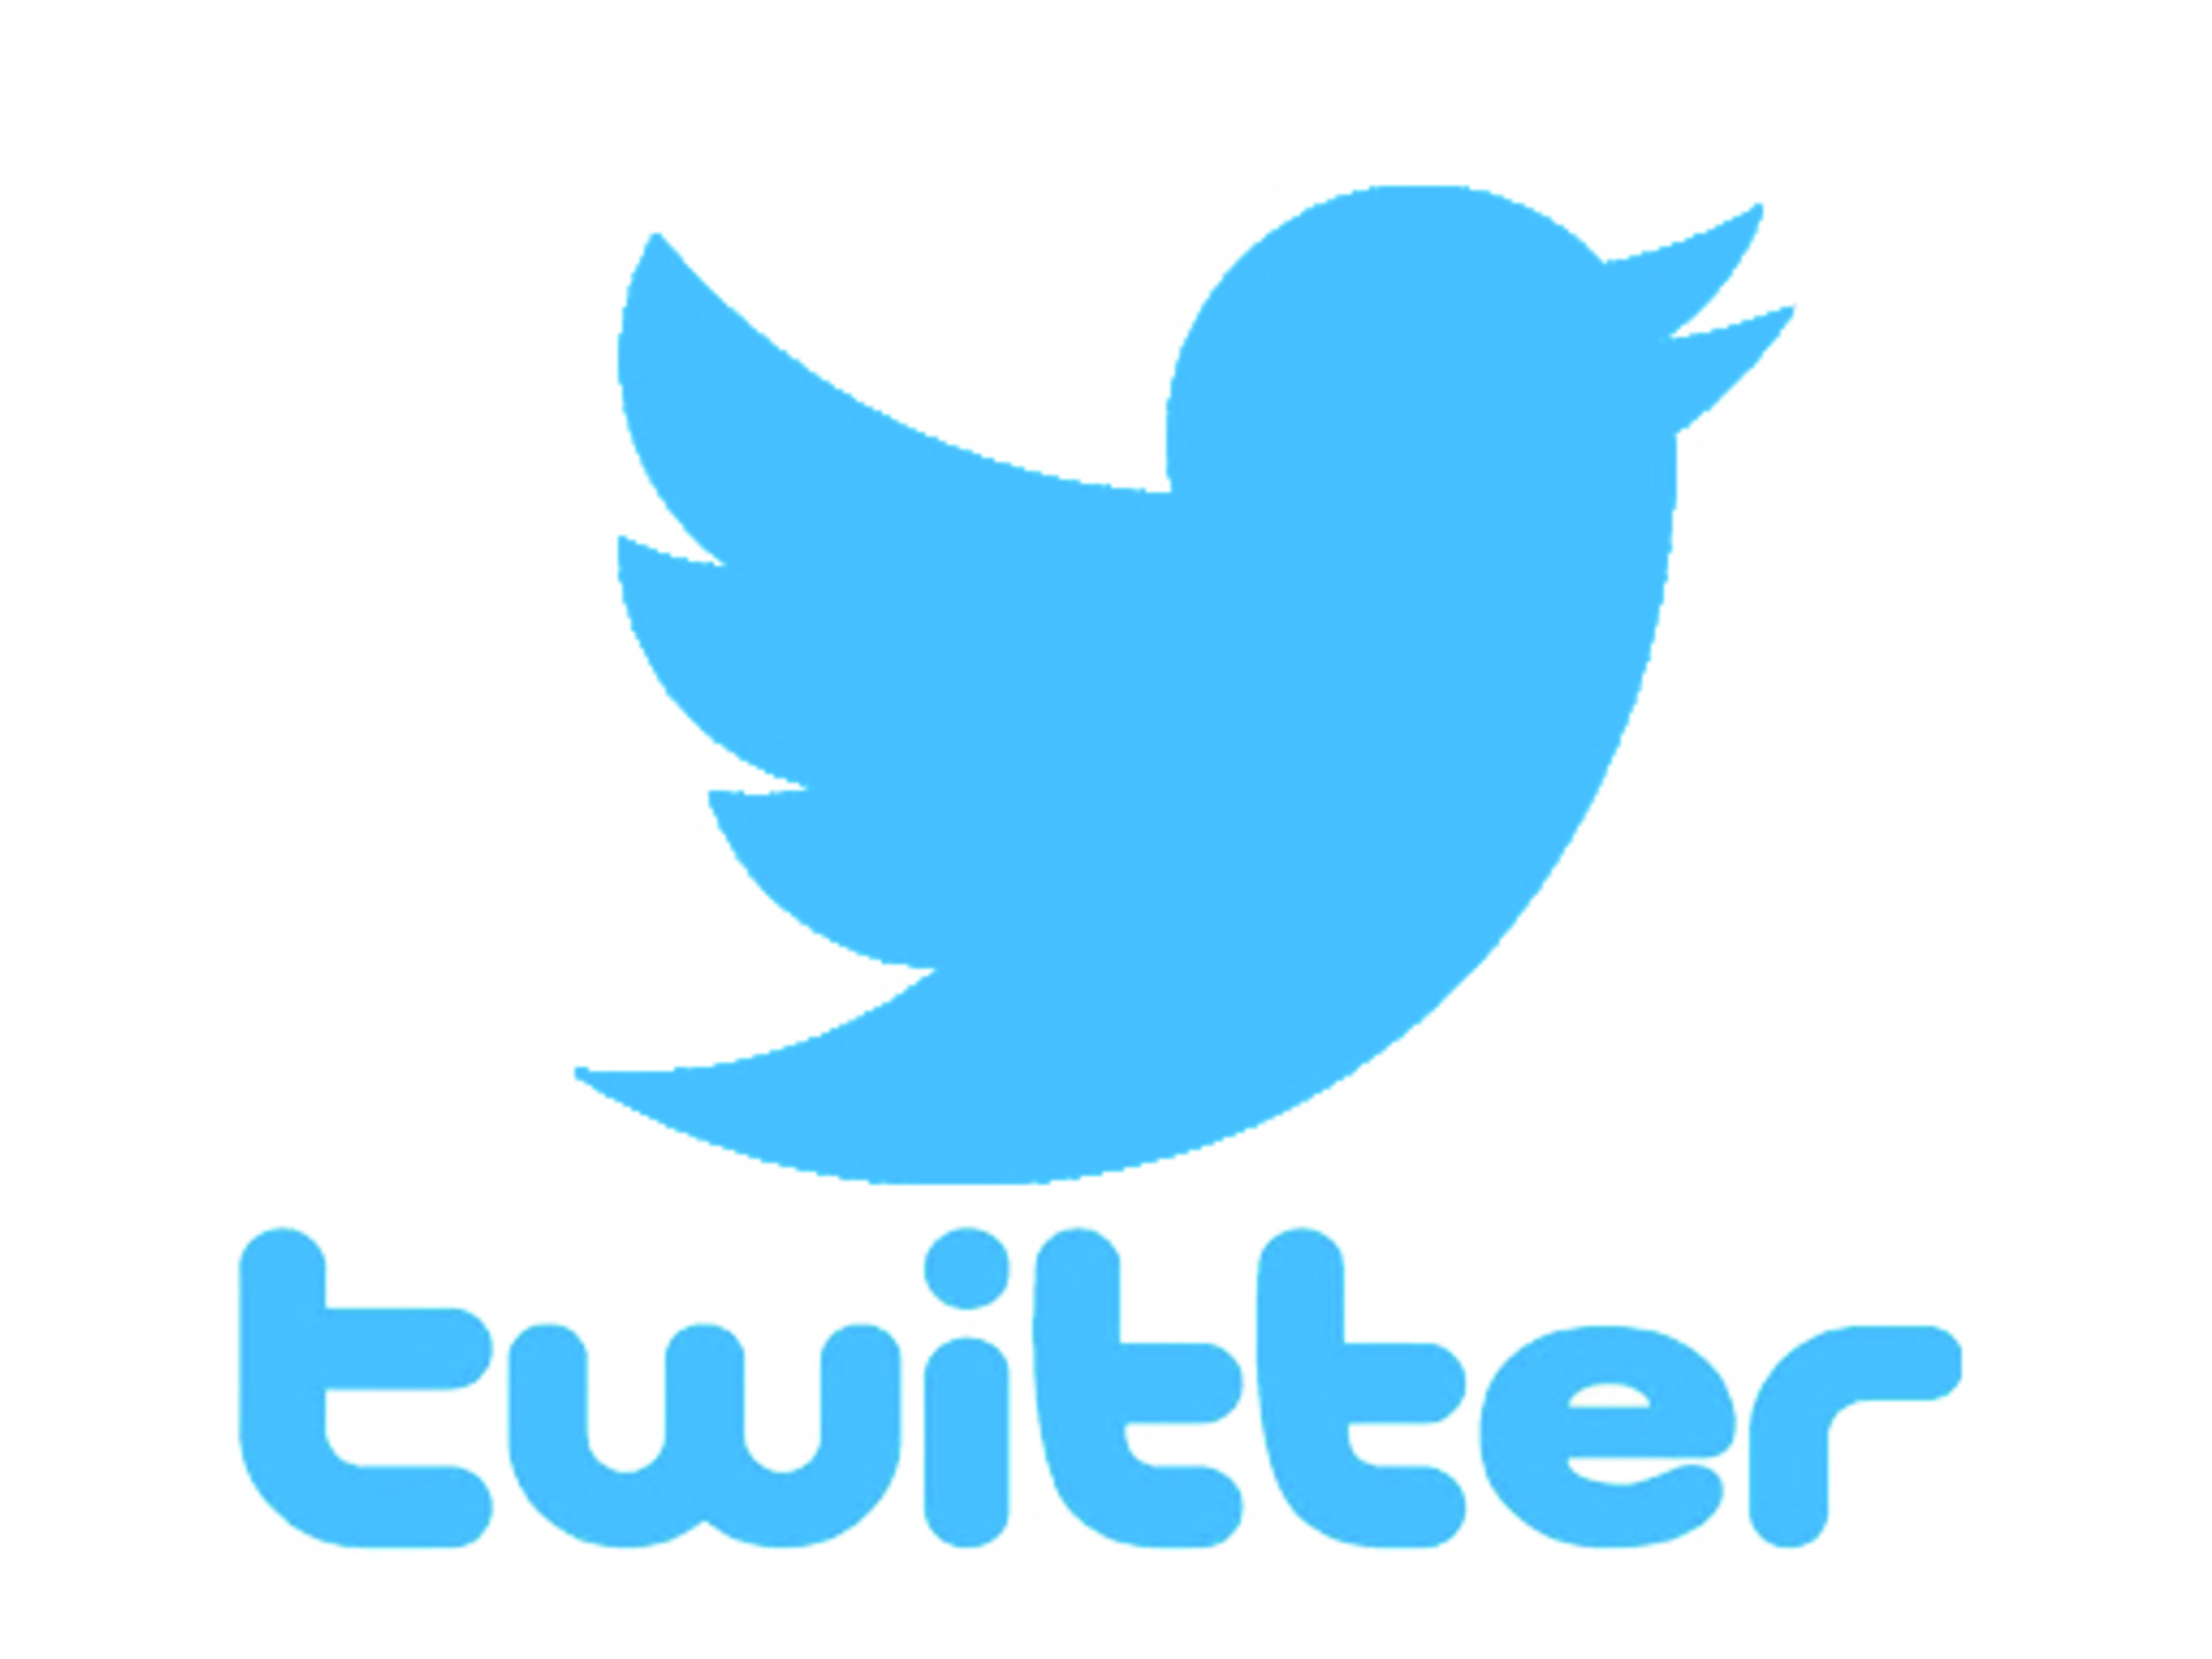 Twitter barely replied to Indian information requests - The Sunday Guardian...